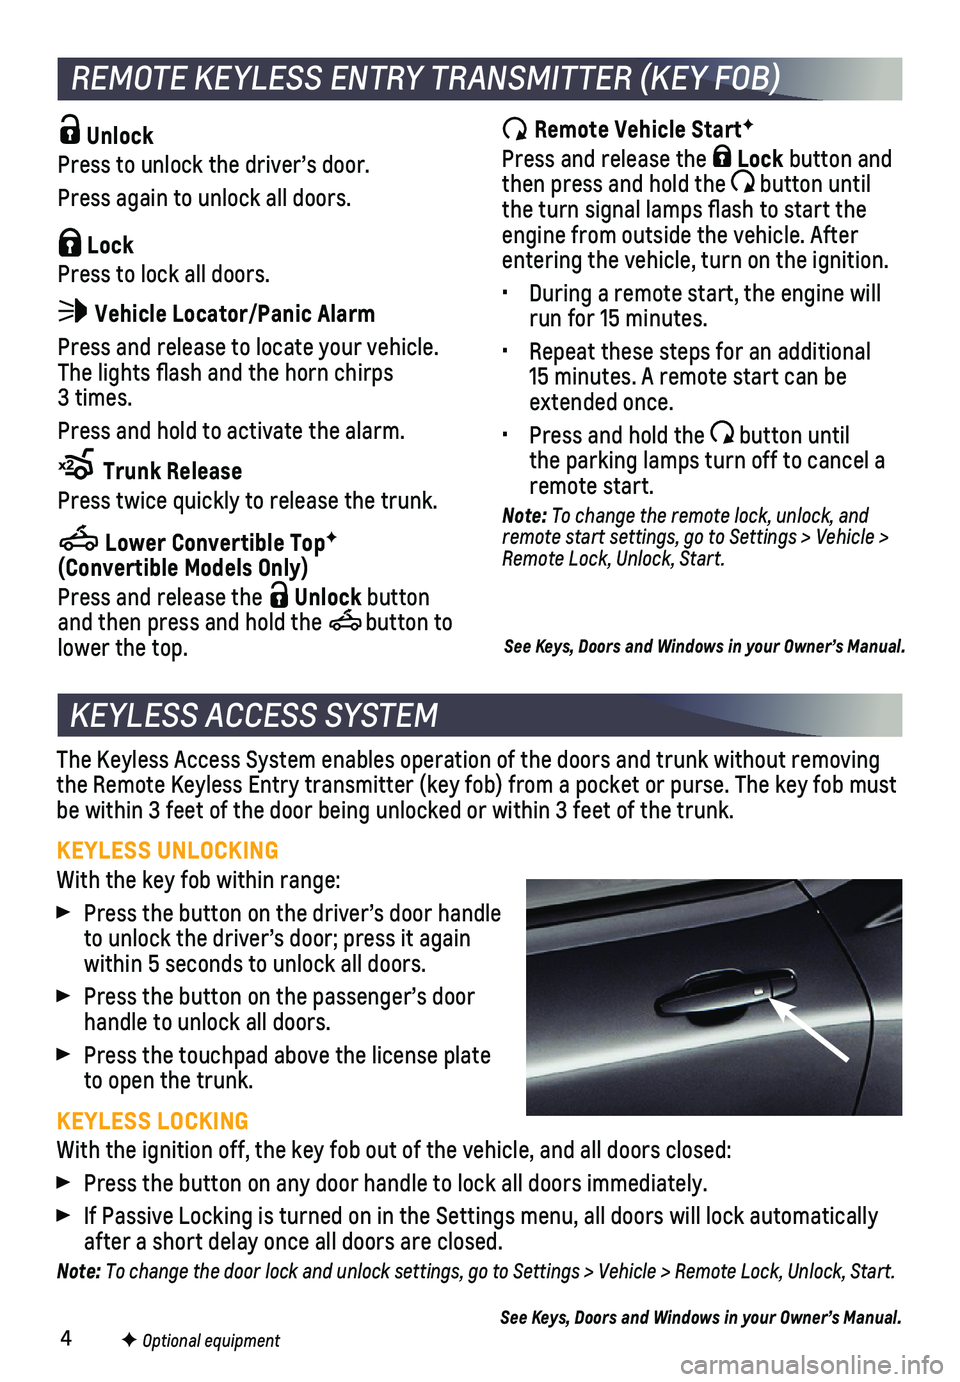 CHEVROLET CAMARO 2021  Get To Know Guide 4
The Keyless Access System enables operation of the doors and trunk witho\
ut removing the Remote Keyless Entry transmitter (key fob) from a pocket or purse.\
 The key fob must be within 3 feet of th